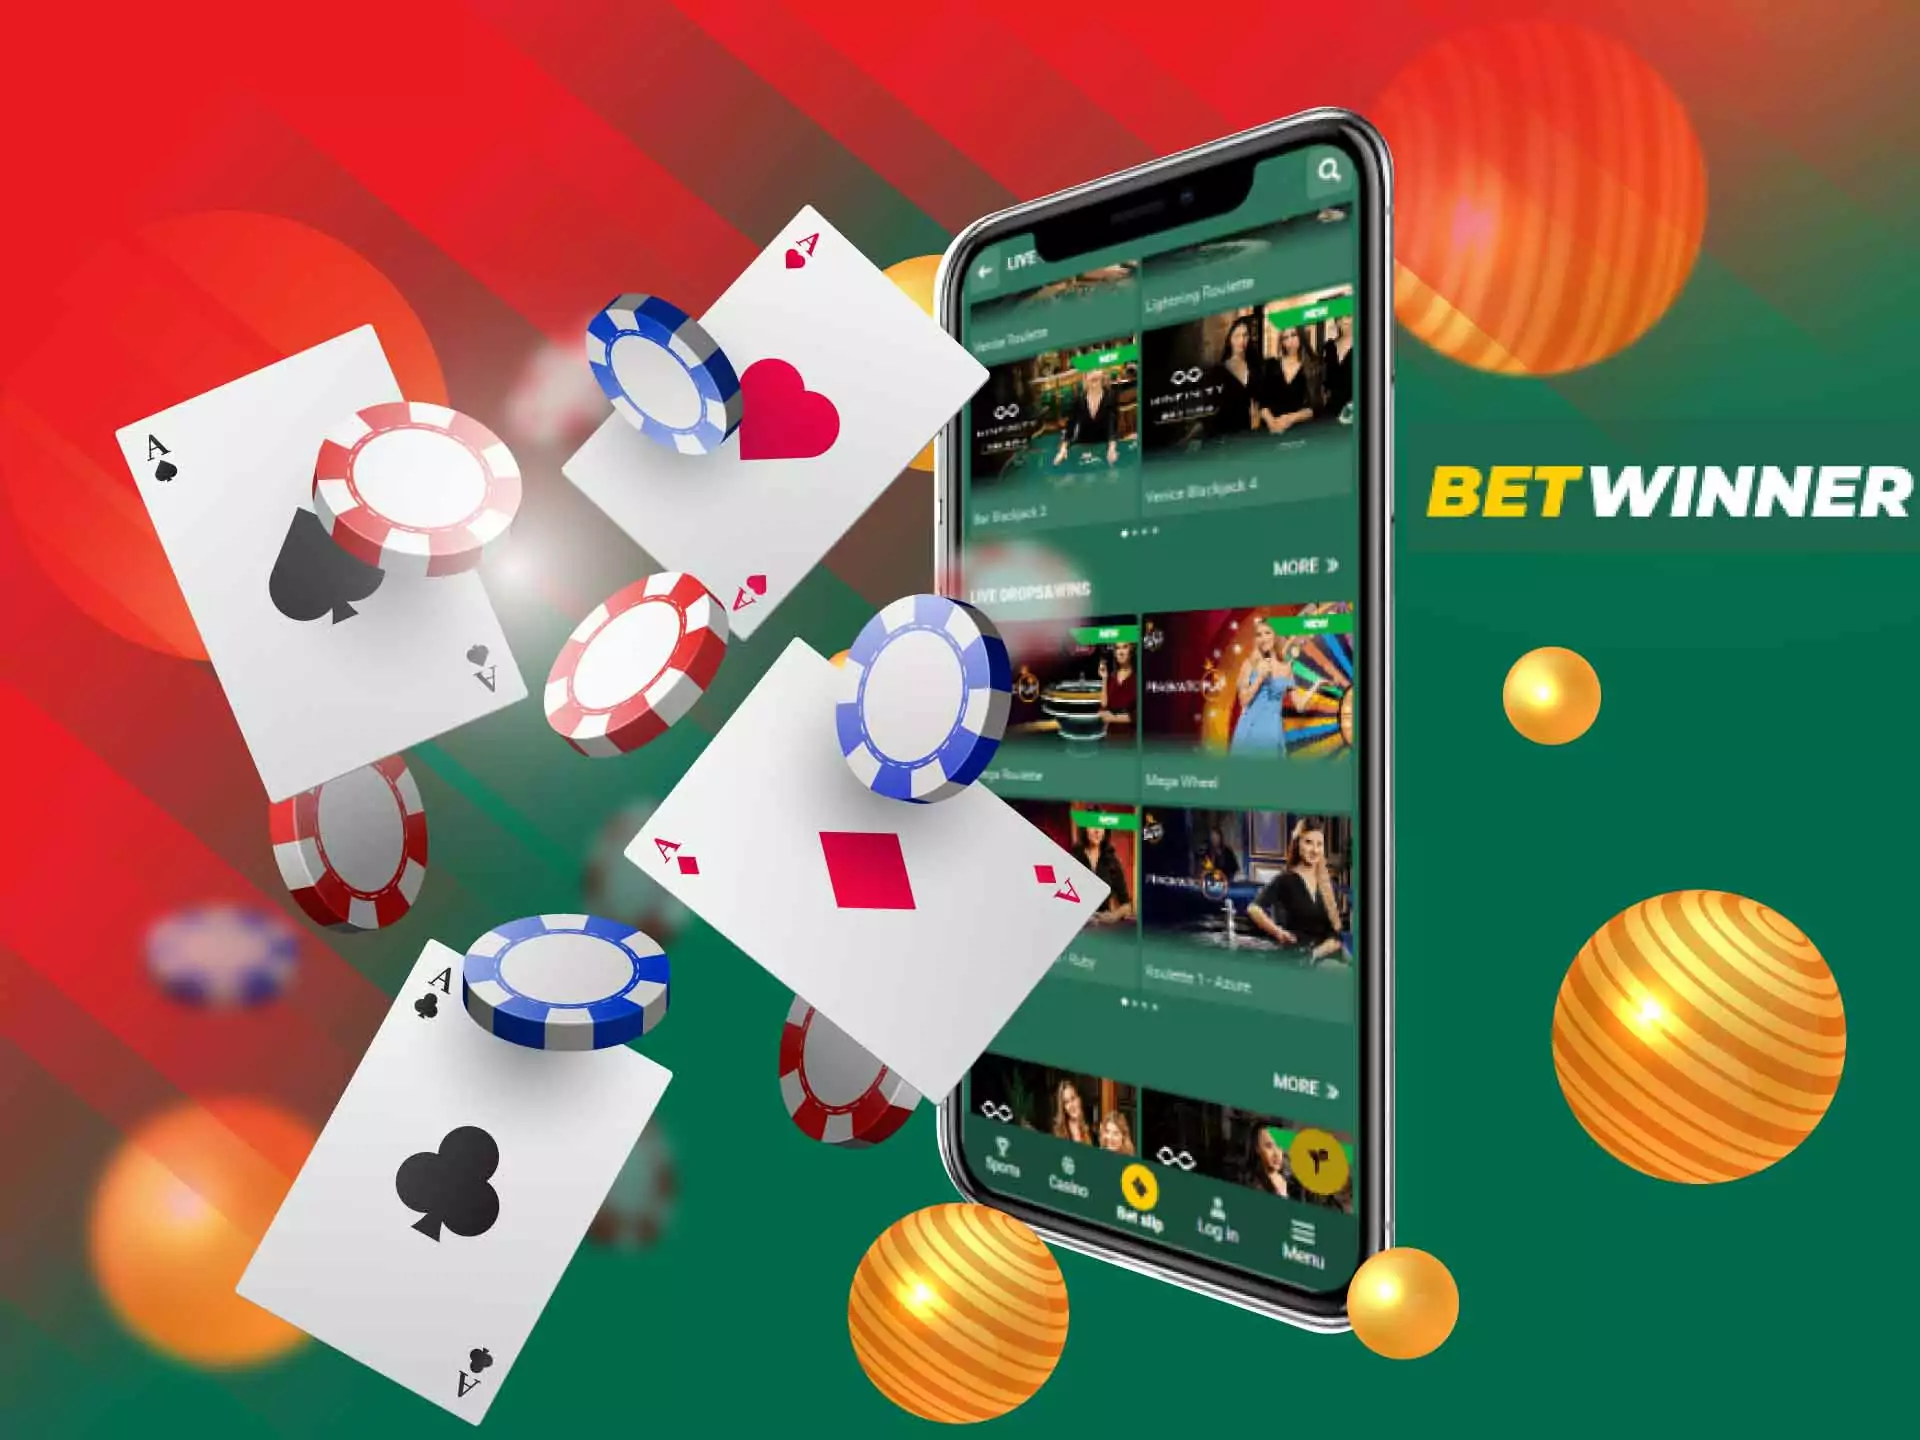 There are different types of poker in the Betwinner casino.